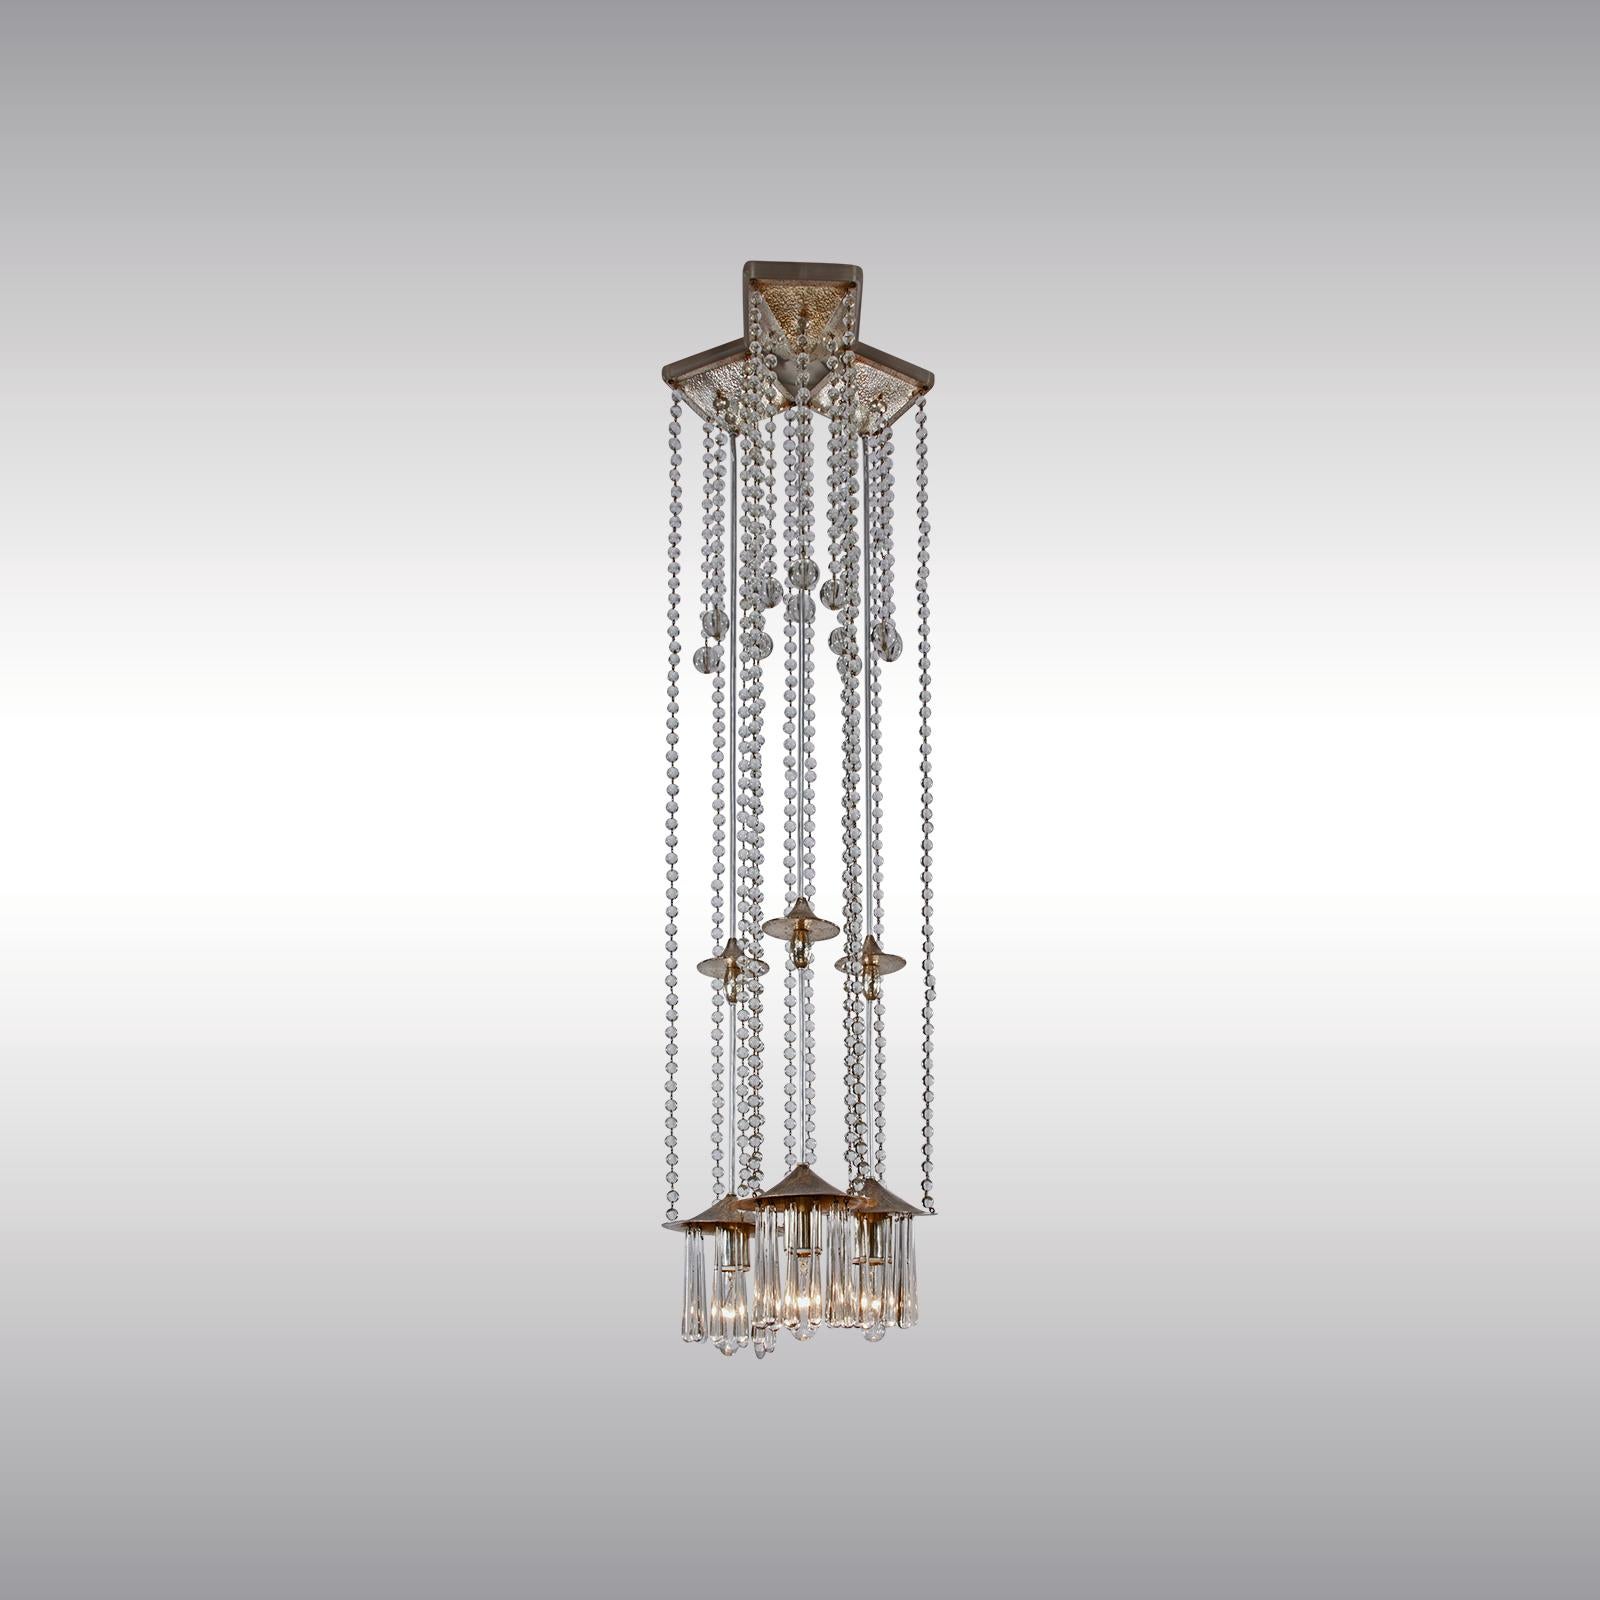 Important design by Josef Hoffmann and the Wiener Werkstätte for the apartment Dr Hermann Wittgenstein in Vienna, Salesianergasse consists of three single pendants combined to a chandelier. Single pendants are as well available. Hammered, chased